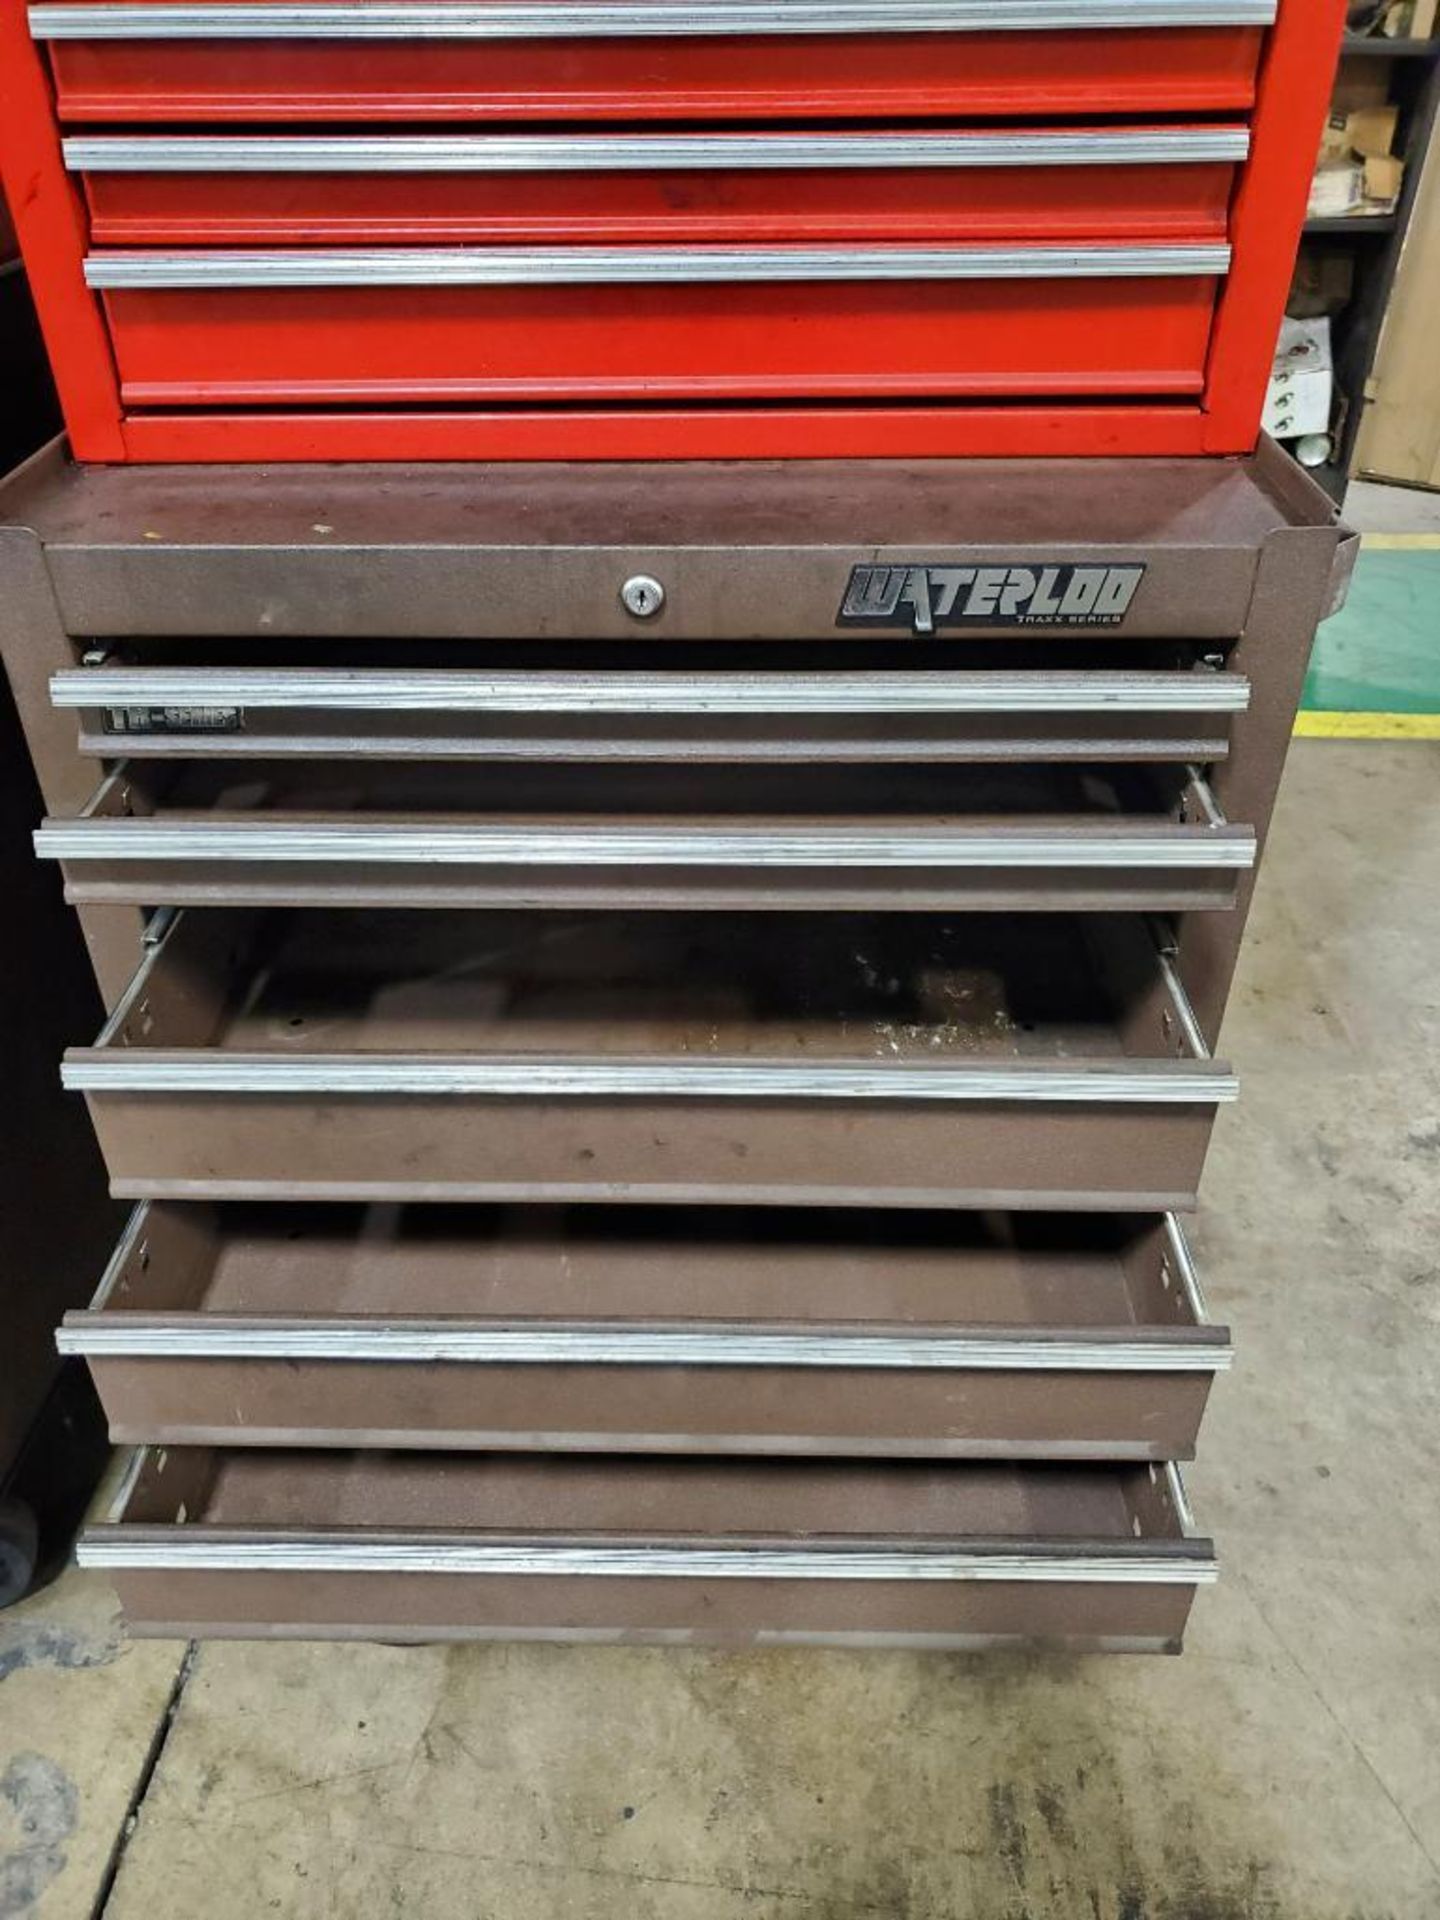 Qty 4 - Assorted tool boxes. Waterloo. 26x12x16, 27x18x41 WxDxH. - Image 4 of 7